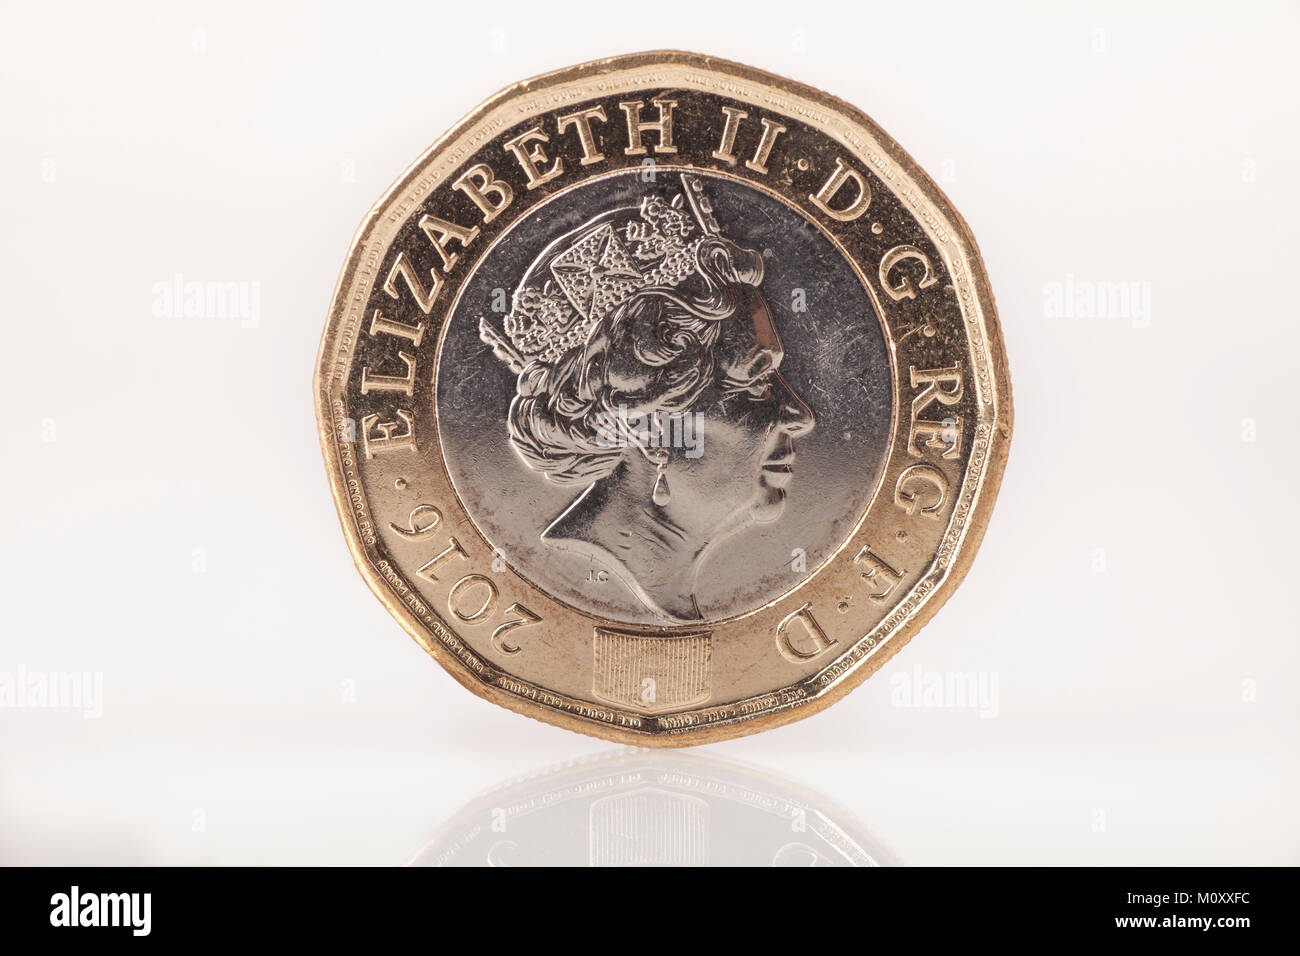 New 2016 one pound coin Stock Photo